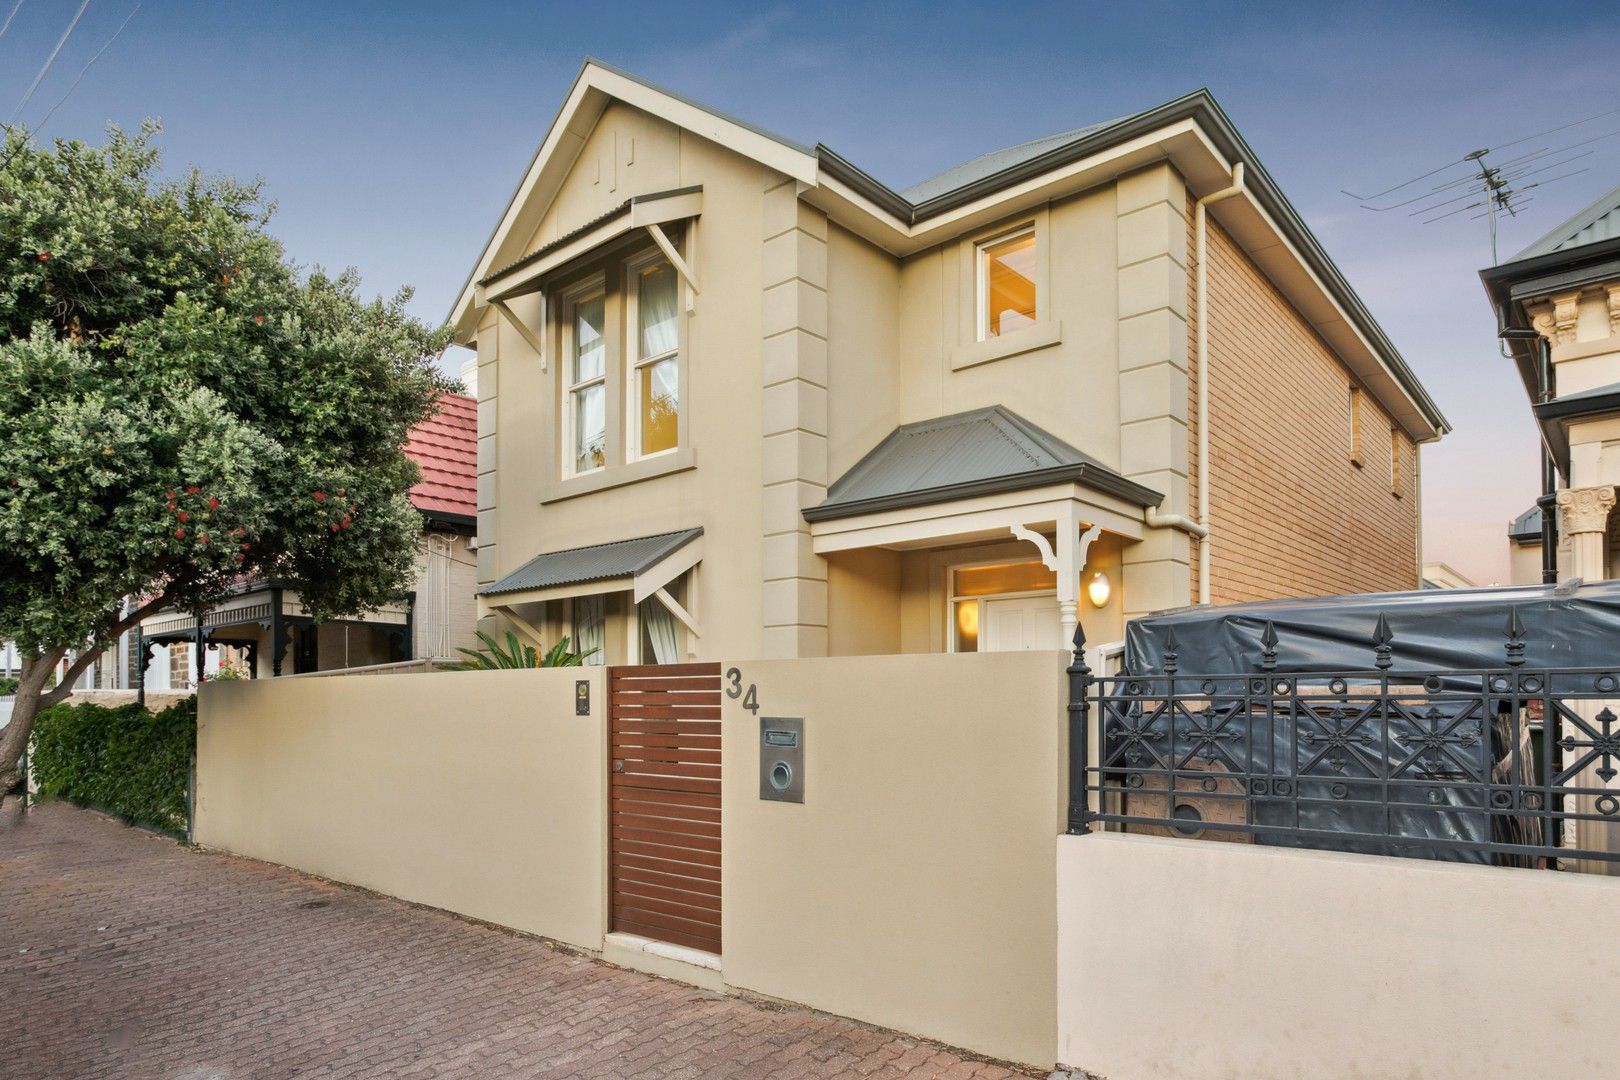 4 bedrooms House in 34 Sussex Street GLENELG SA, 5045